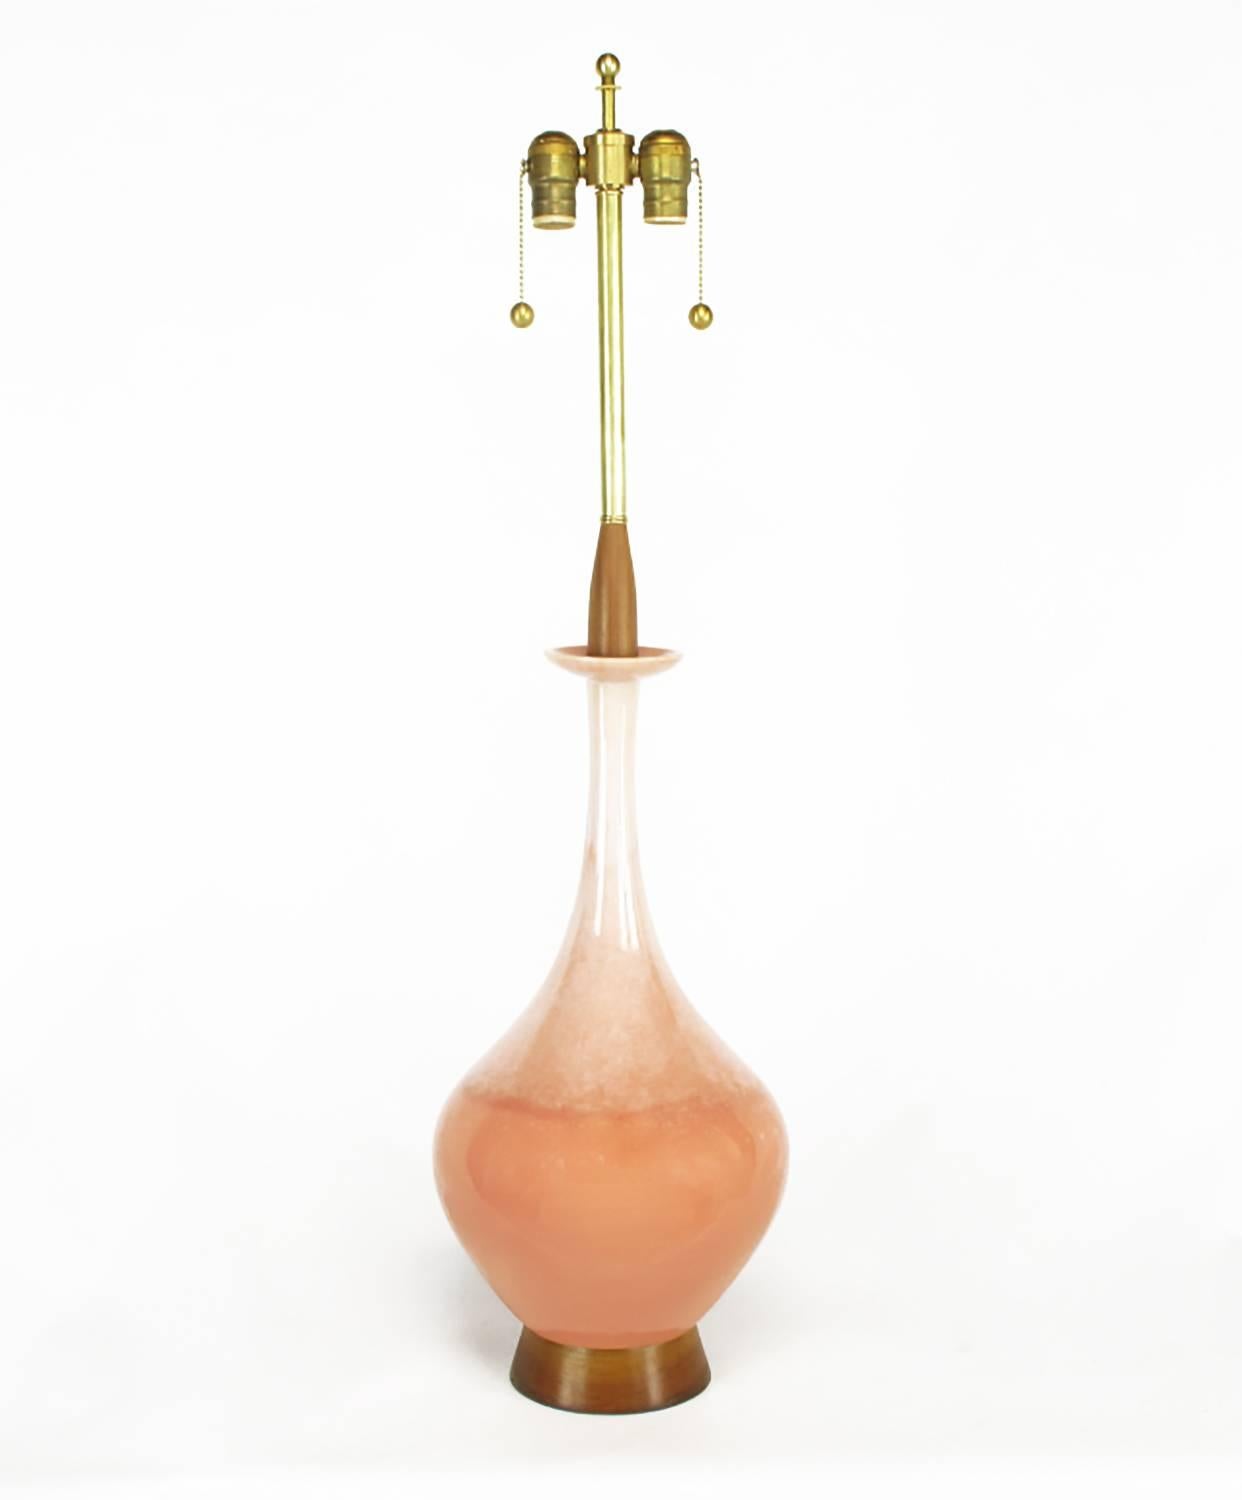 Coral drip glazed ceramic gourd form table lamp with intrinsic bobeche, walnut wood base and partial stem. Brass stem and double cluster socket. Sold sans shade.